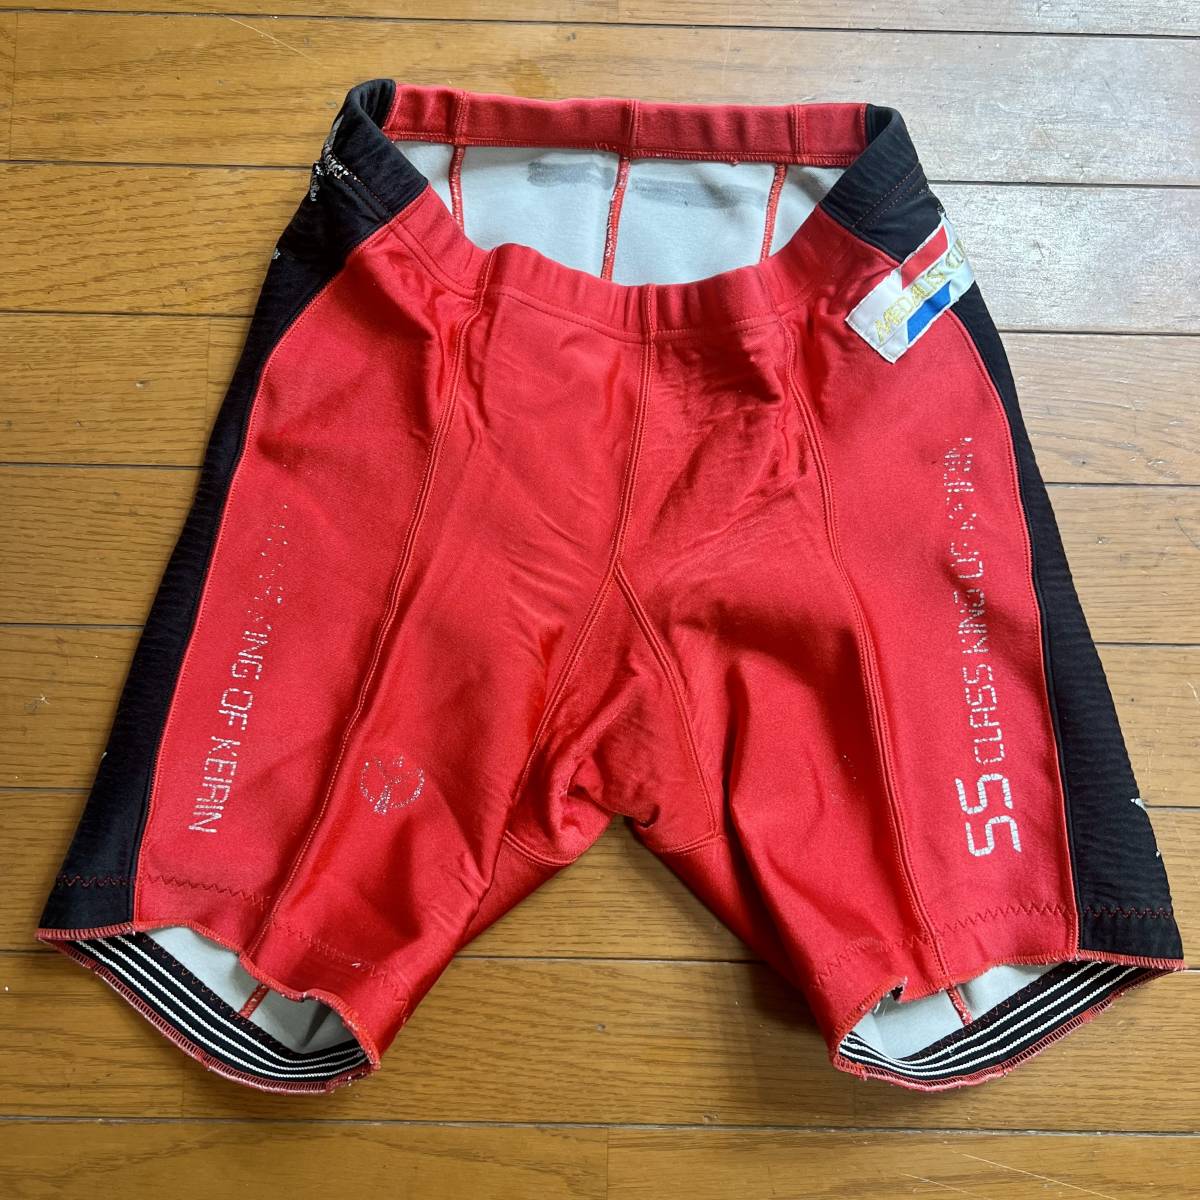  valuable S class S.MEDALIST CLUB Medalist Club bicycle race racer pants ②